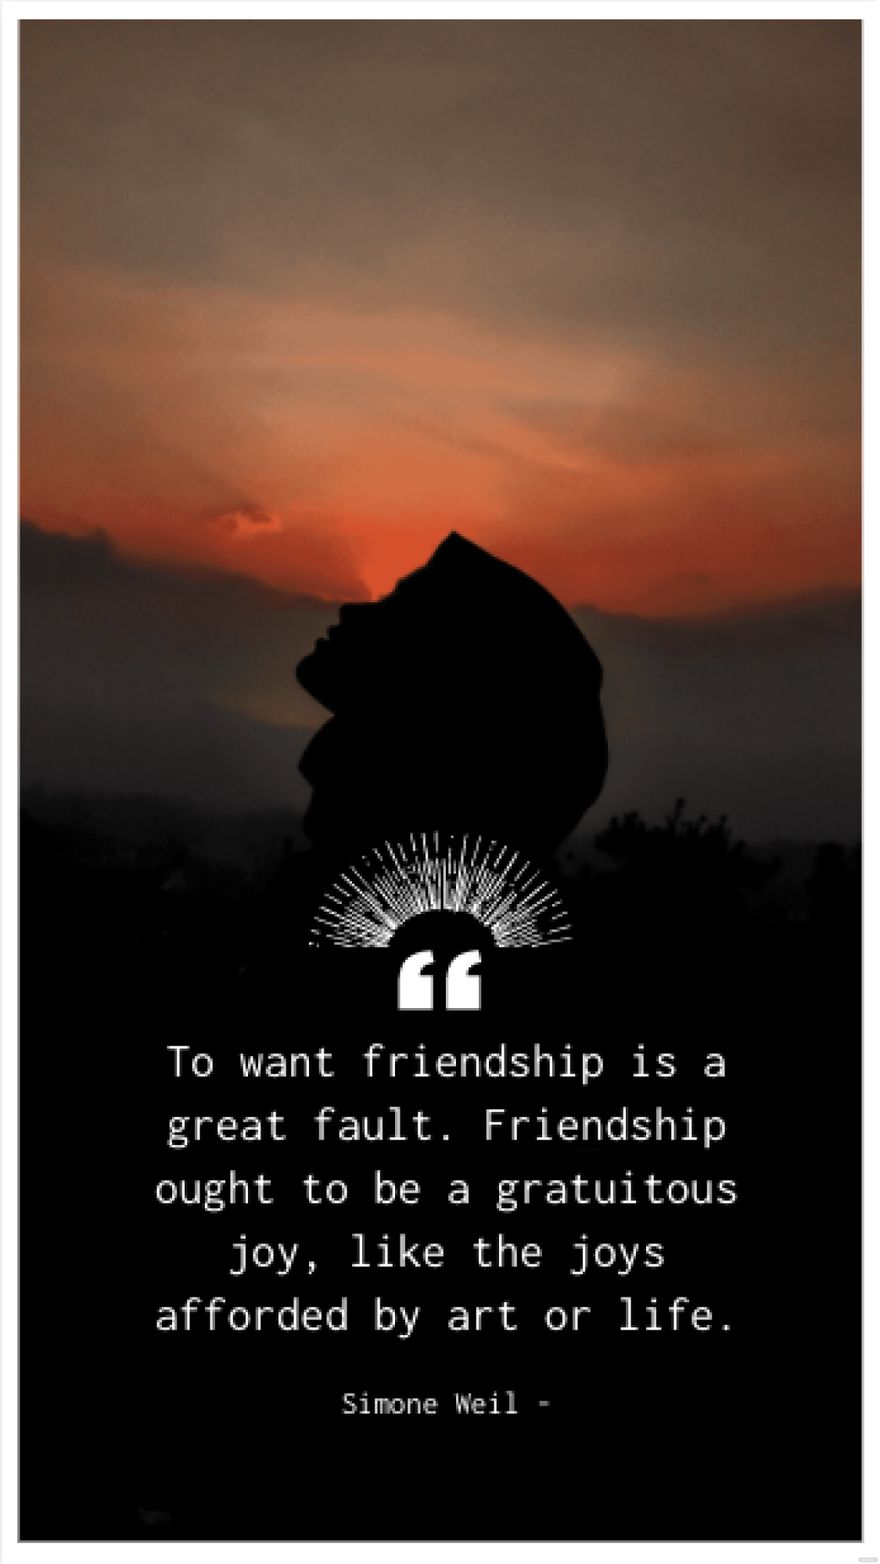 Simone Weil - To want friendship is a great fault. Friendship ought to be a gratuitous joy, like the joys afforded by art or life. in JPG